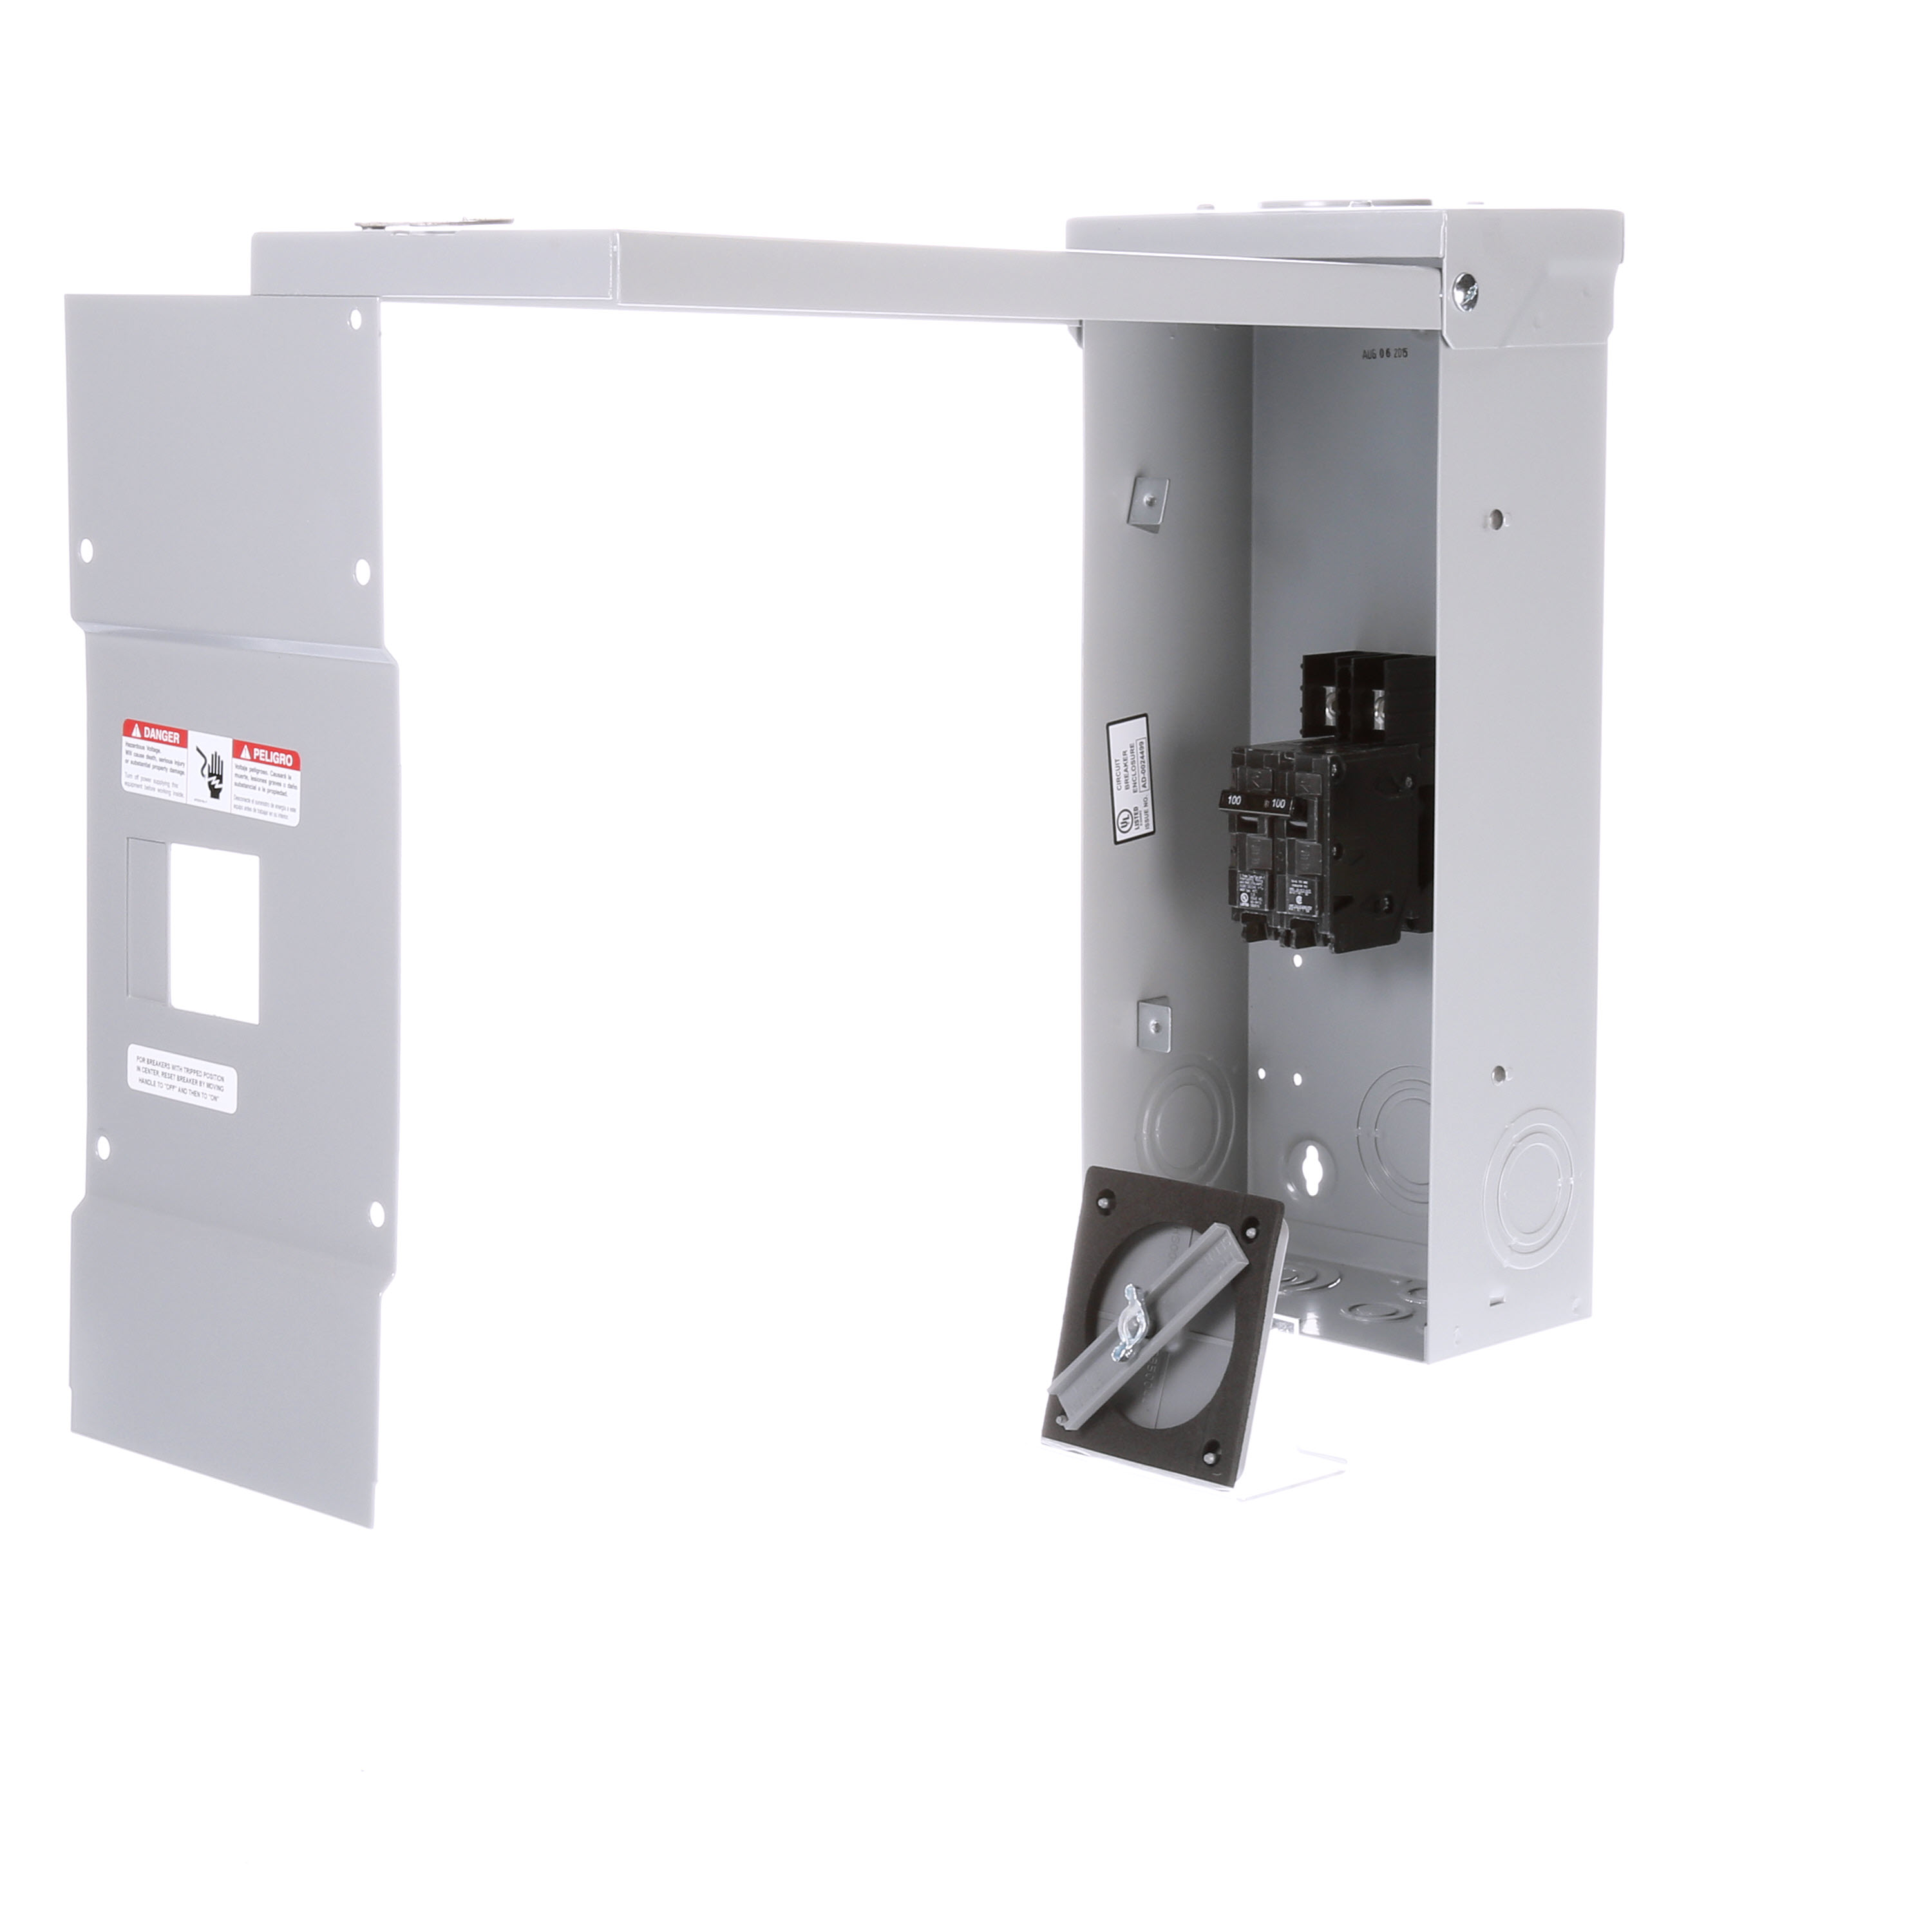 Siemens Low Voltage Residential Specialty Load Centers CB Enclosures. Load Centers Type 1Application Residential V. Rating 120/240V A. Rating 100A Phase 1PH Load Regulation 100A Wiring Conf 3w Bus Rating 100A Interrupt Rating 22000AIC